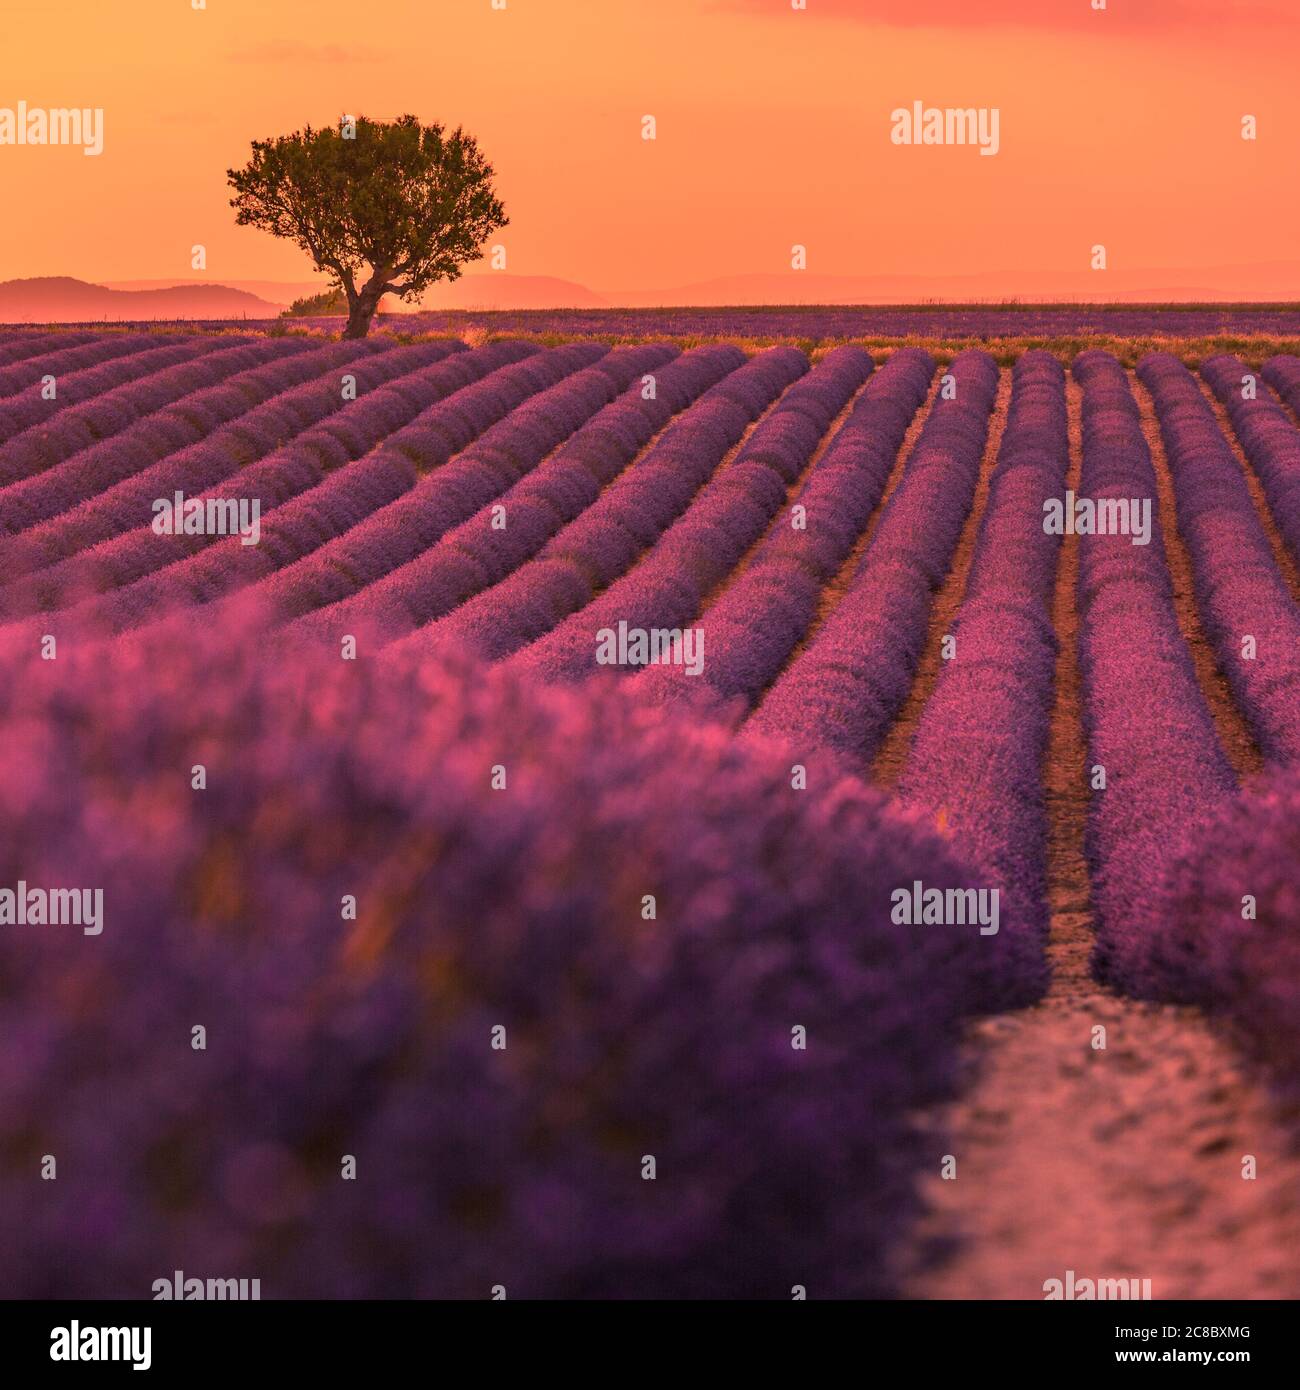 Stunning landscape with lavender field at sunset. Blooming violet fragrant lavender flowers with sun rays with warm sunset sky. Stock Photo